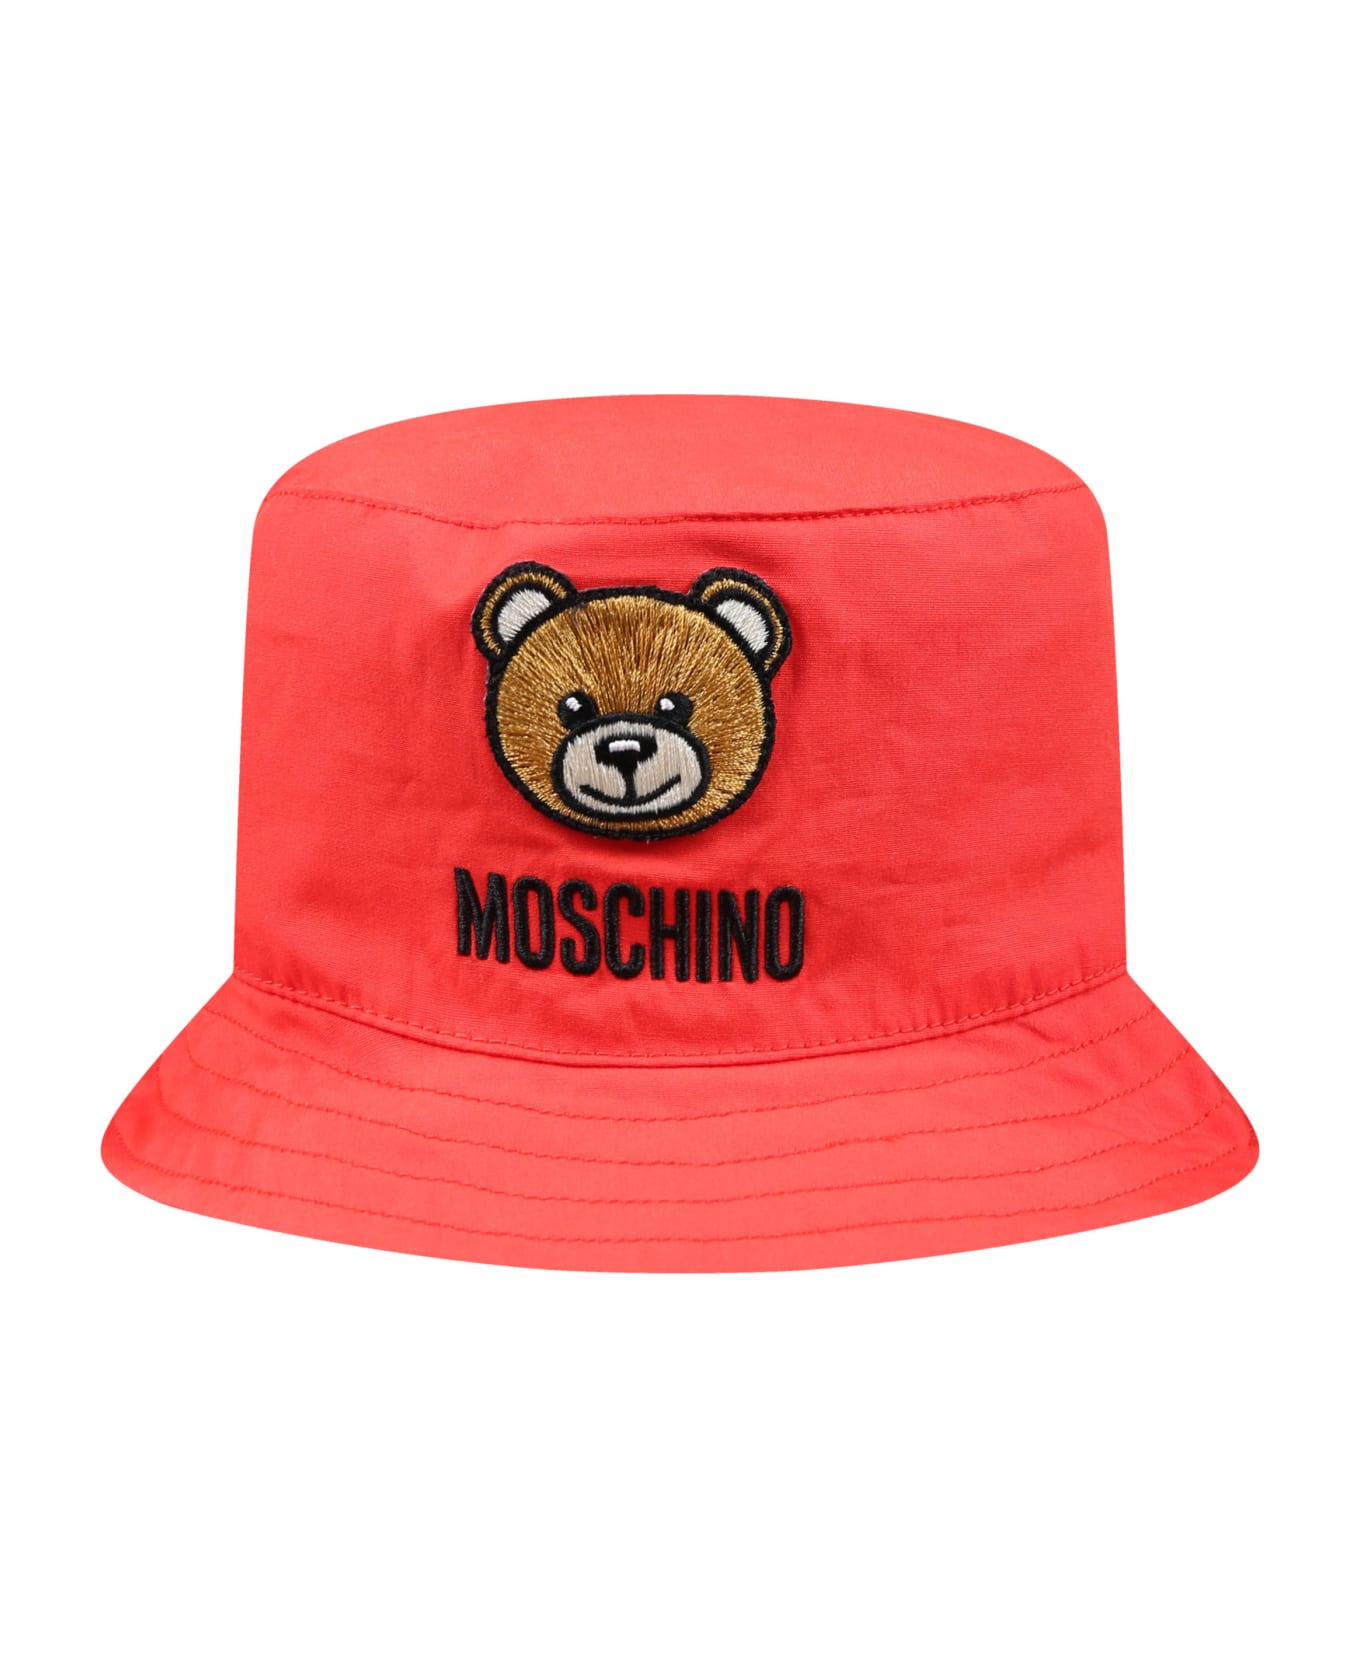 Moschino Red Cloche For Baby Kids With Teddy Bear - Red アクセサリー＆ギフト